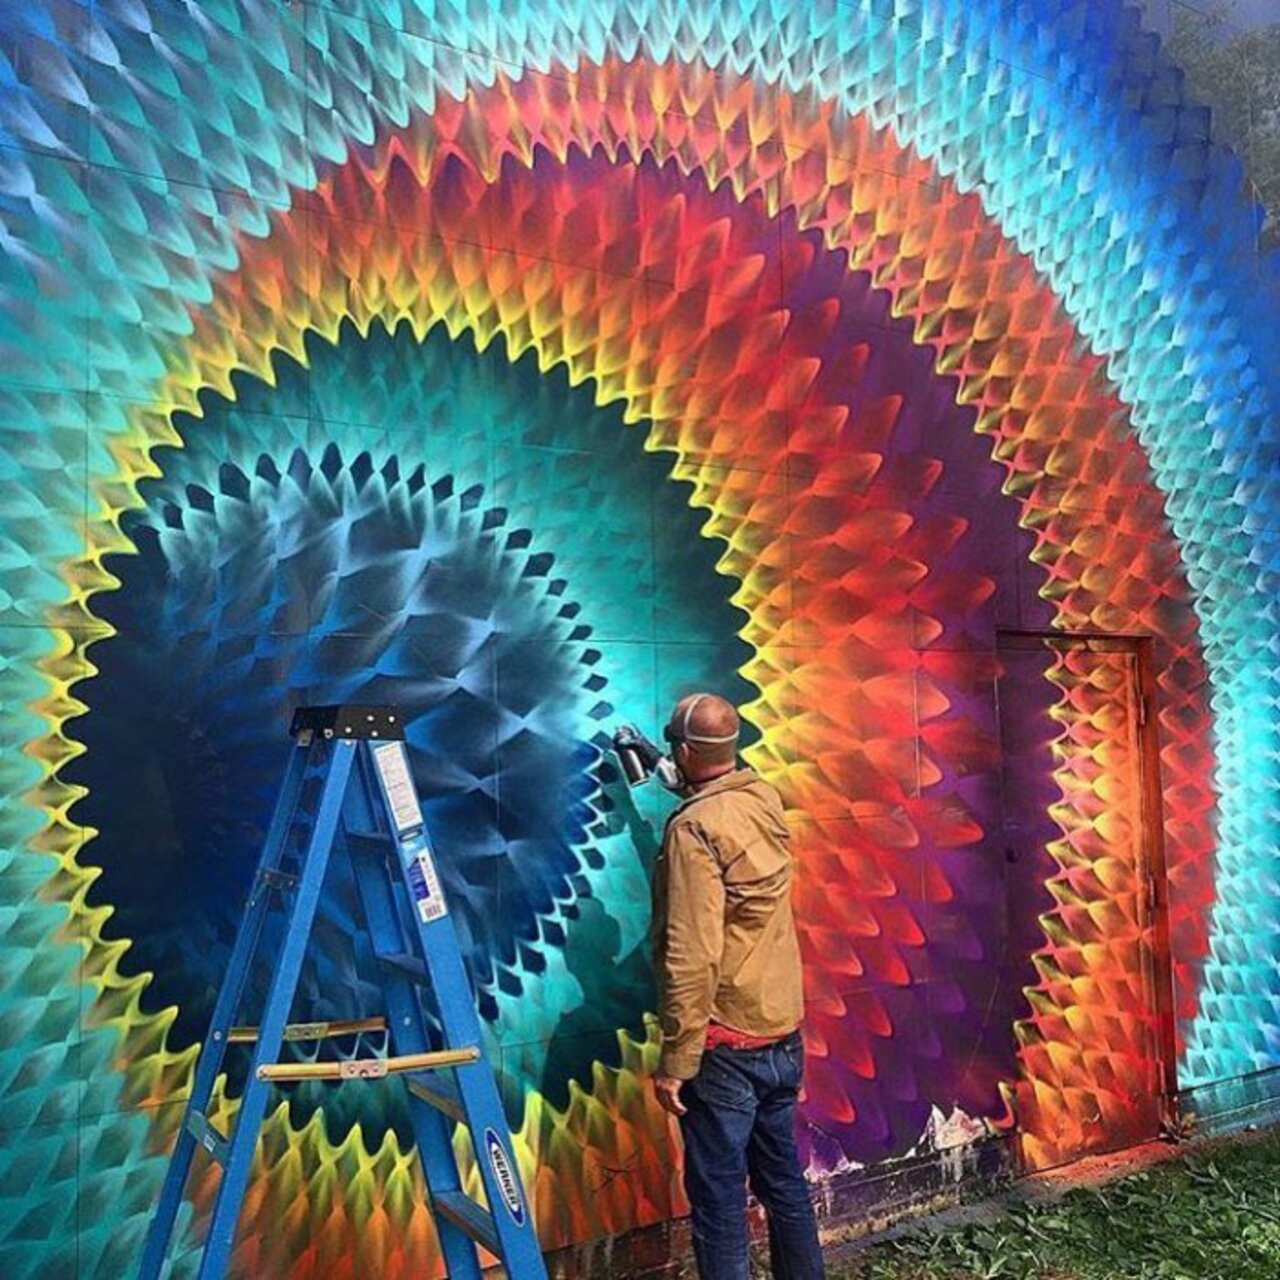 #StreetArt Rainbow – Creative Colours | Be ▲rtist - Be ▲rt https://beartistbeart.com/2016/06/23/streetart-rainbow-creative-colours/?utm_campaign=crowdfire&utm_content=crowdfire&utm_medium=social&utm_source=twitter https://t.co/oncPssR9oB